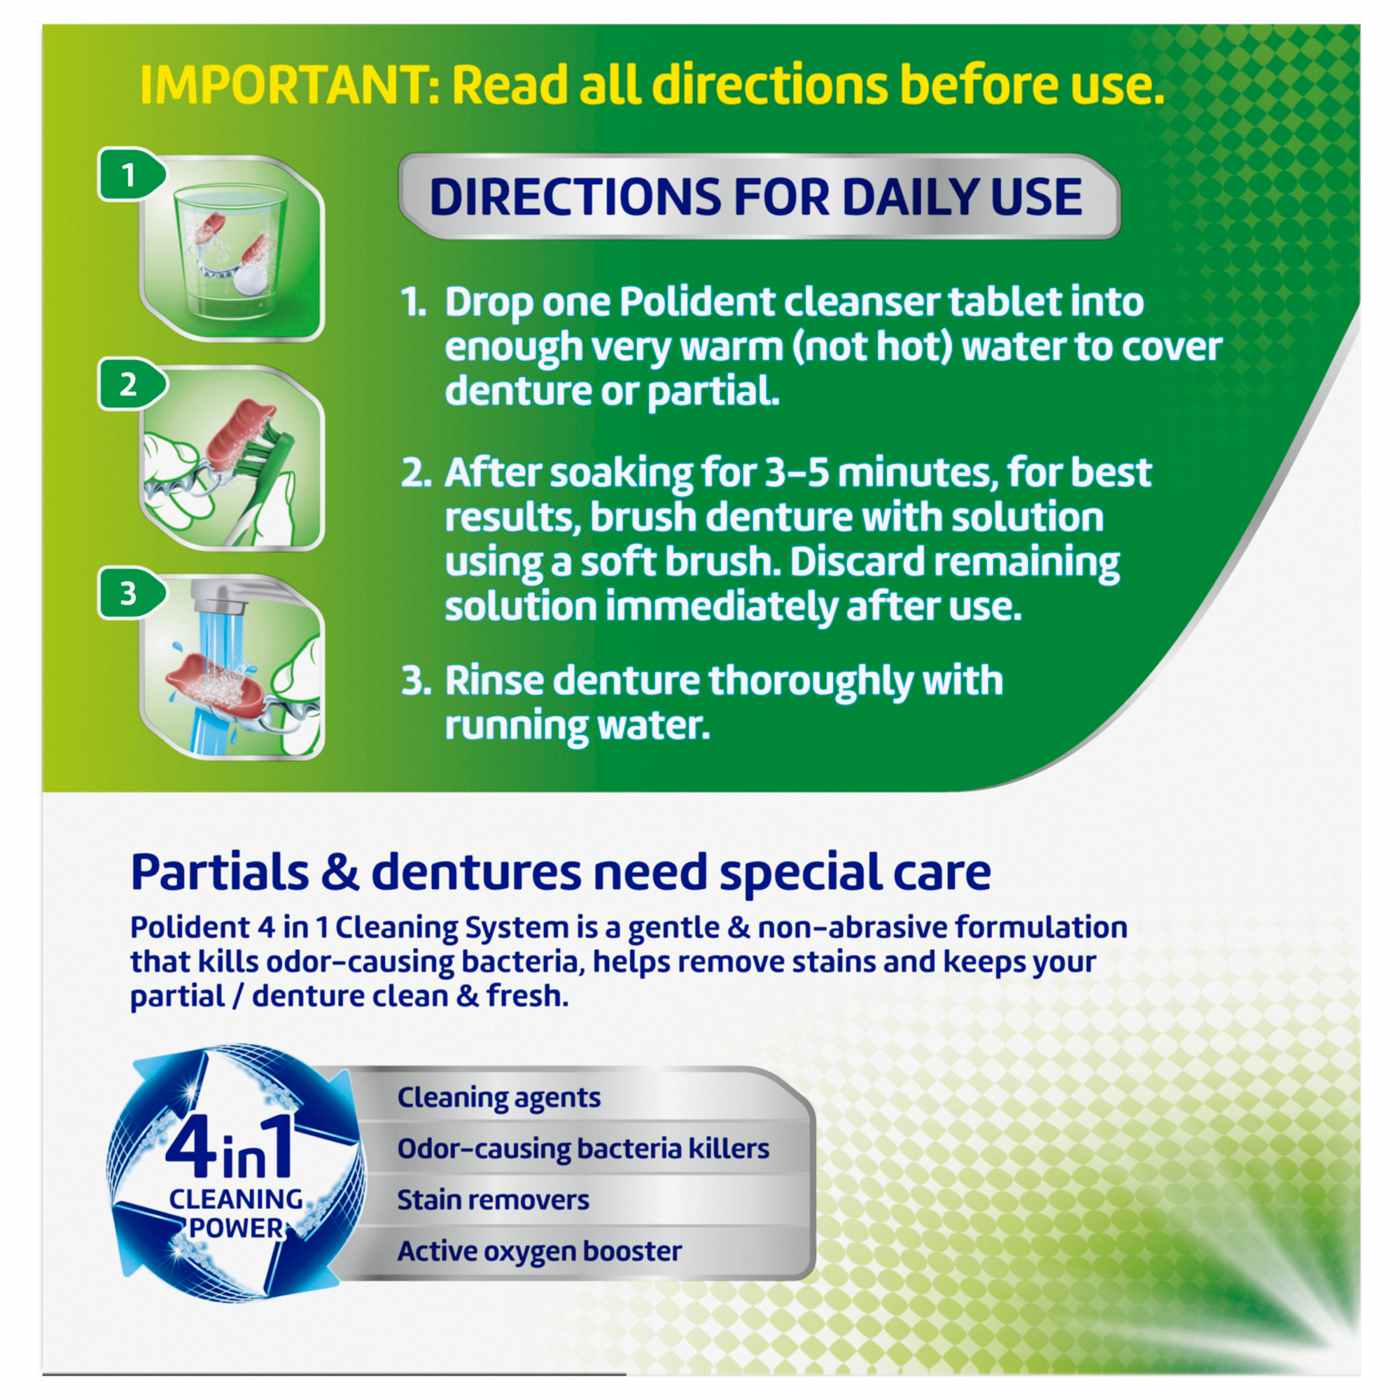 Polident Antibacterial 3 Minute Denture Cleanser Tablets; image 4 of 8